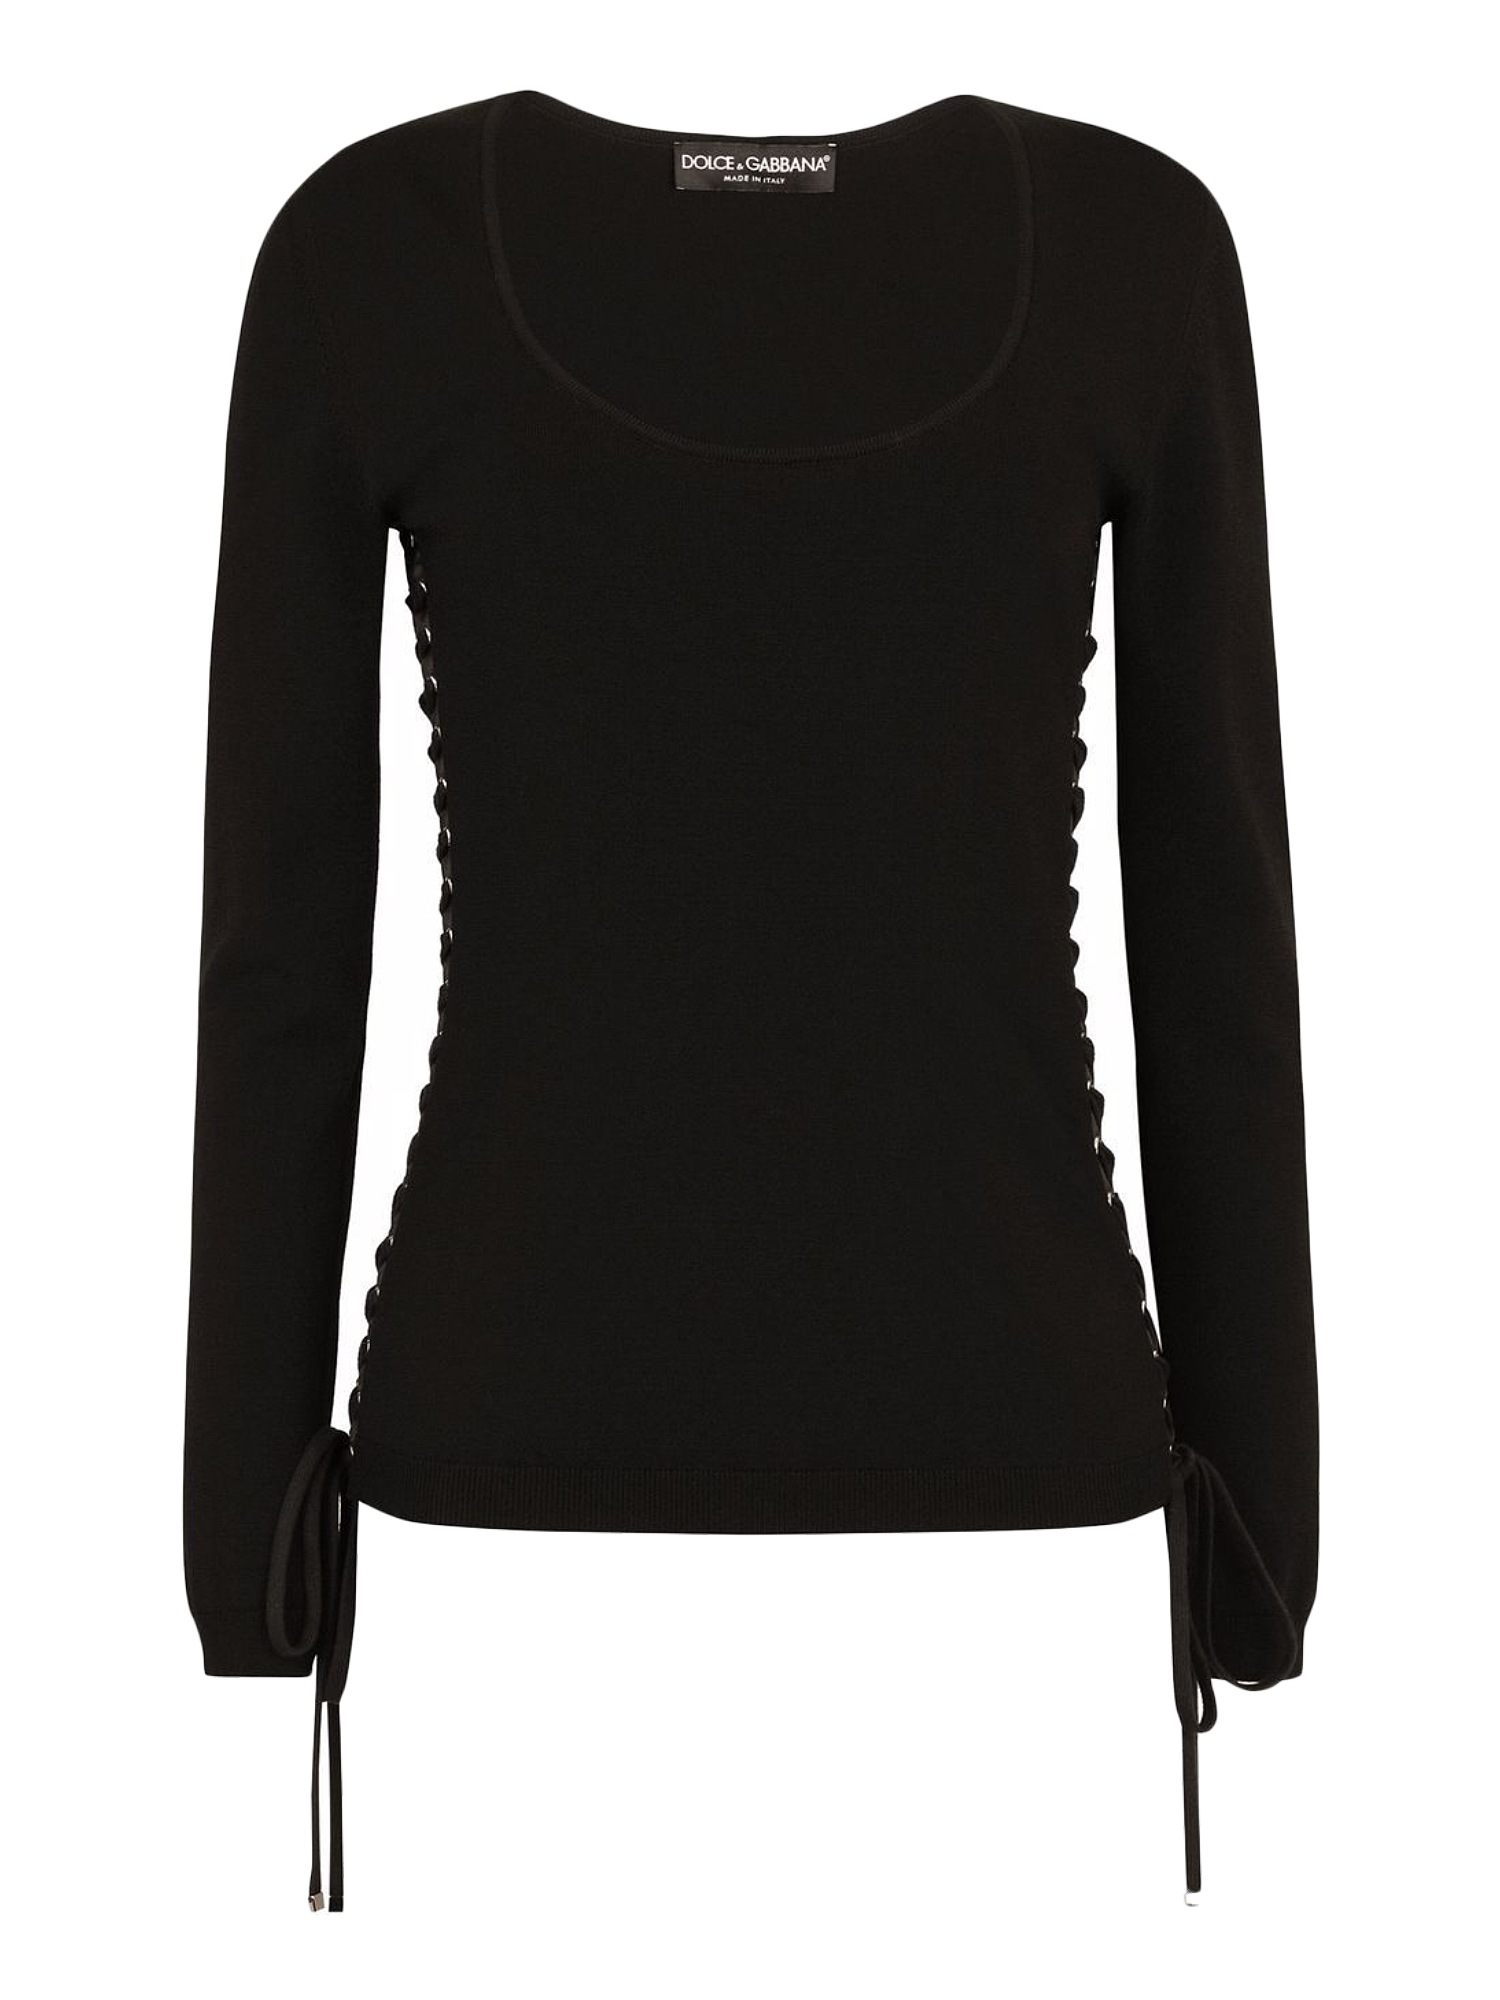 DOLCE & GABBANA LACE UP FITTED jumper